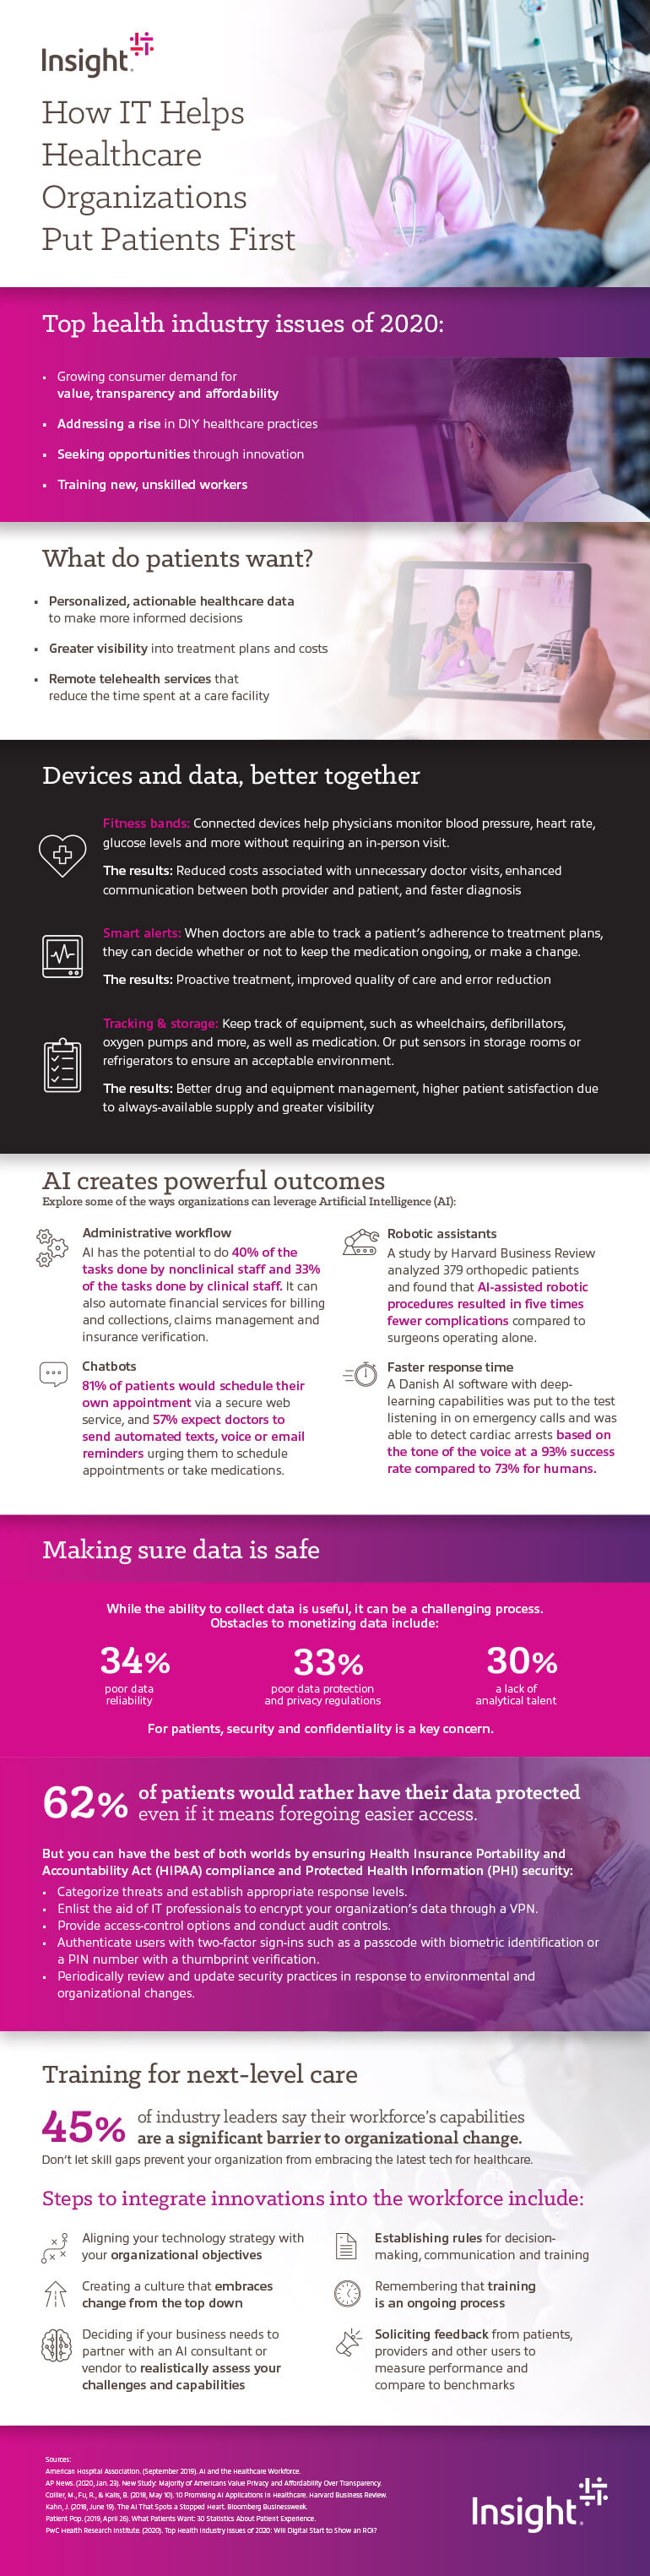 How IT Helps Healthcare Organizations Put Patients First infographic as transcribed below